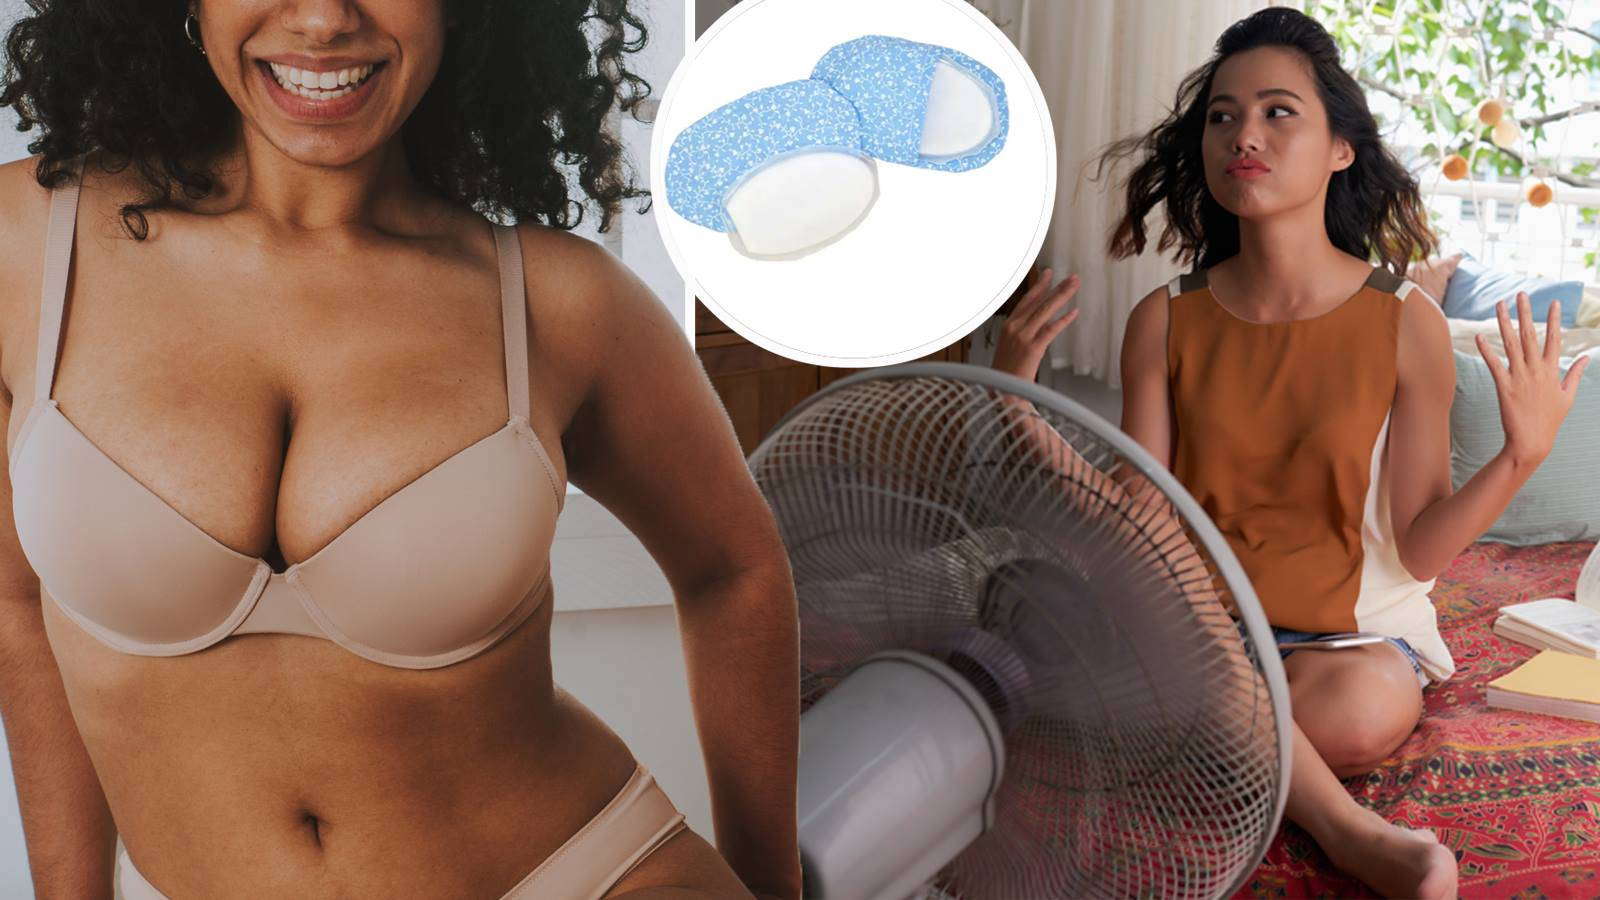 These freezable bra inserts could be the solution for sweaty boobs